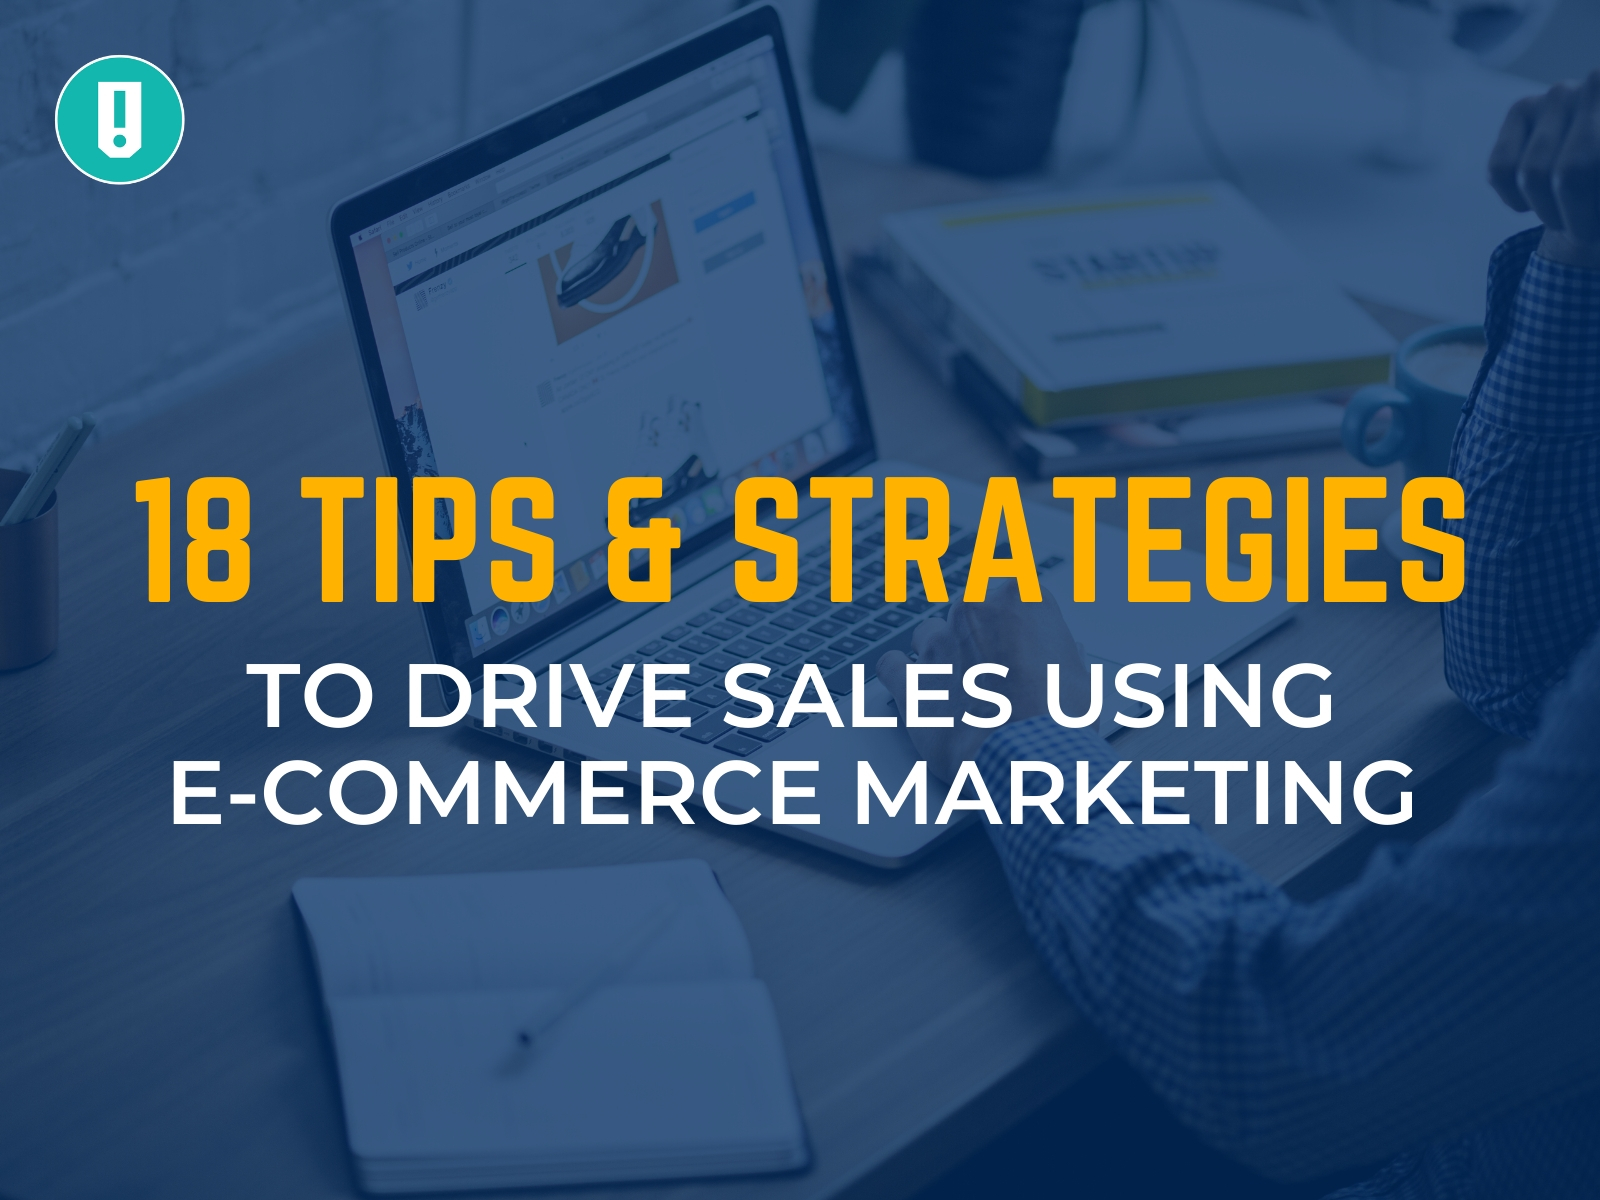 18 Tips & Strategies to Drive Sales using E-Commerce Marketing